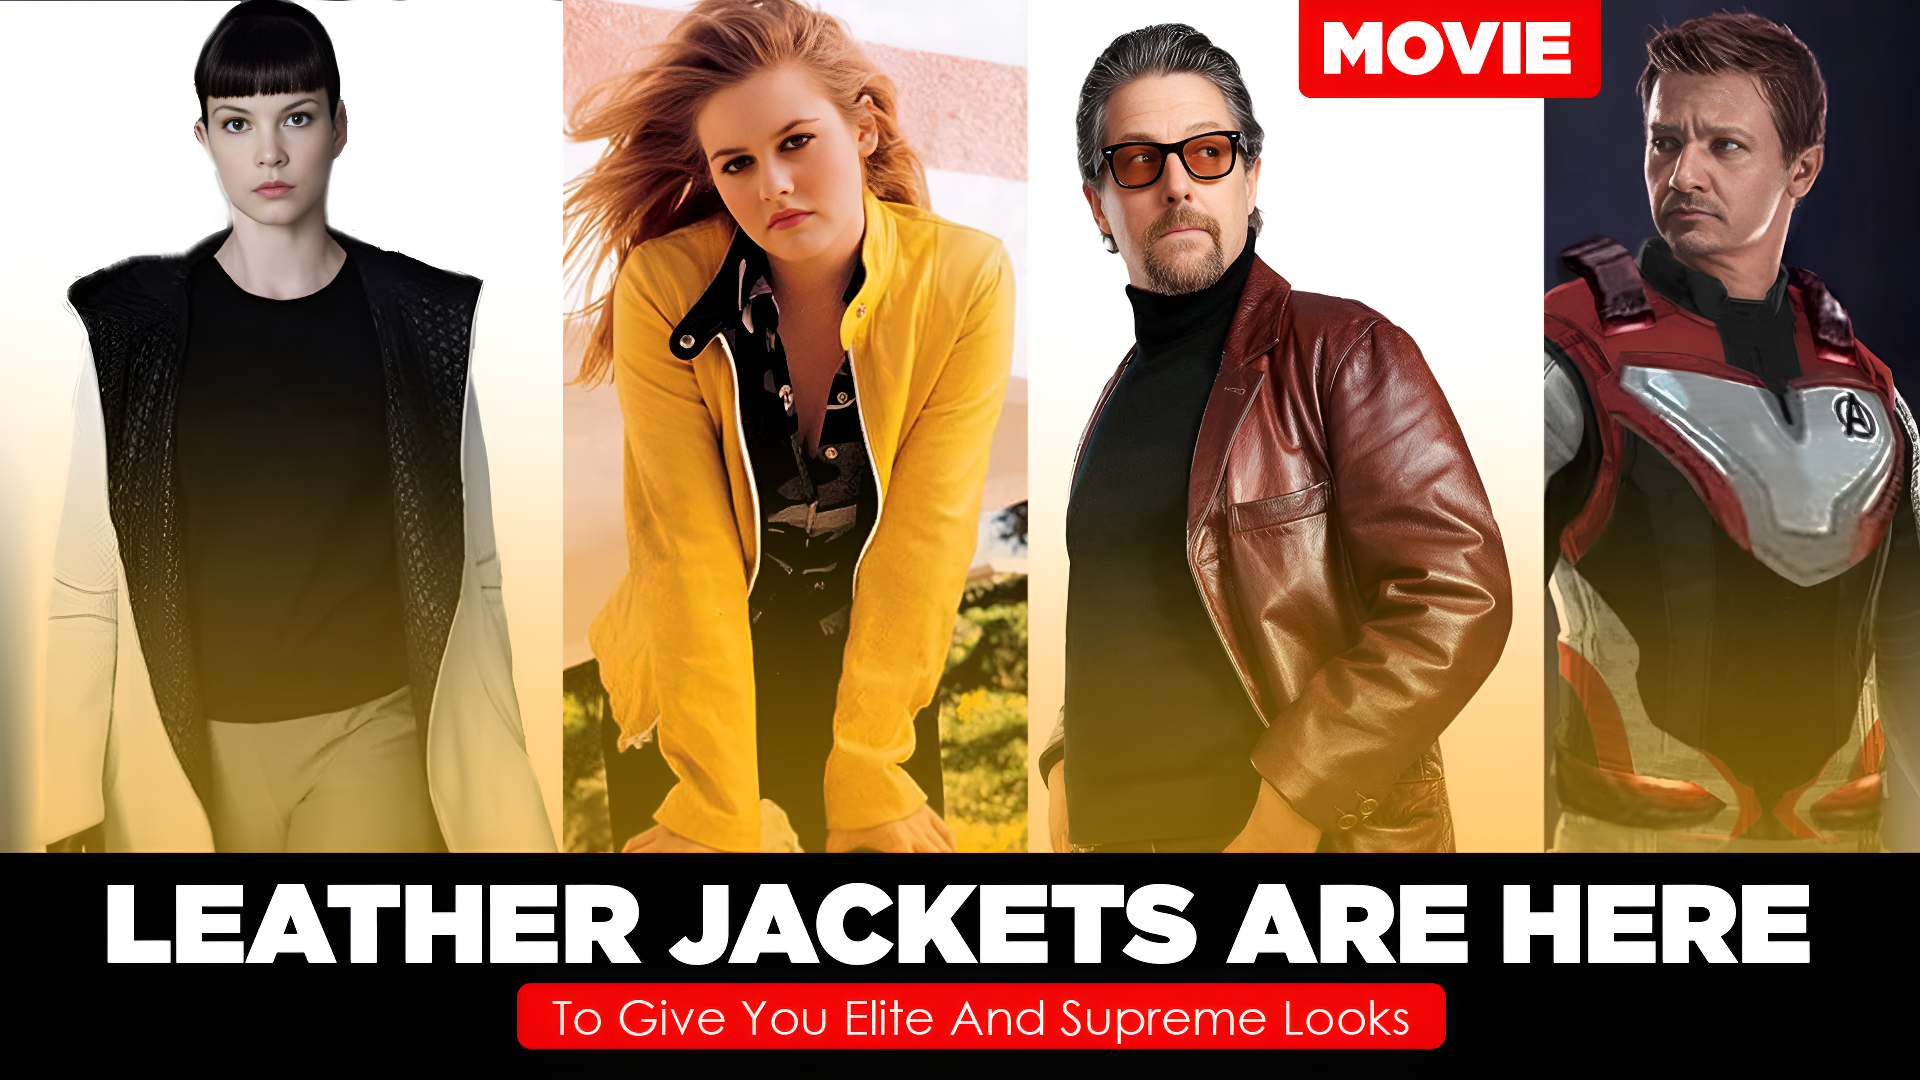 Movie Leather Jackets Are Here To Give You Elite And Supreme Looks